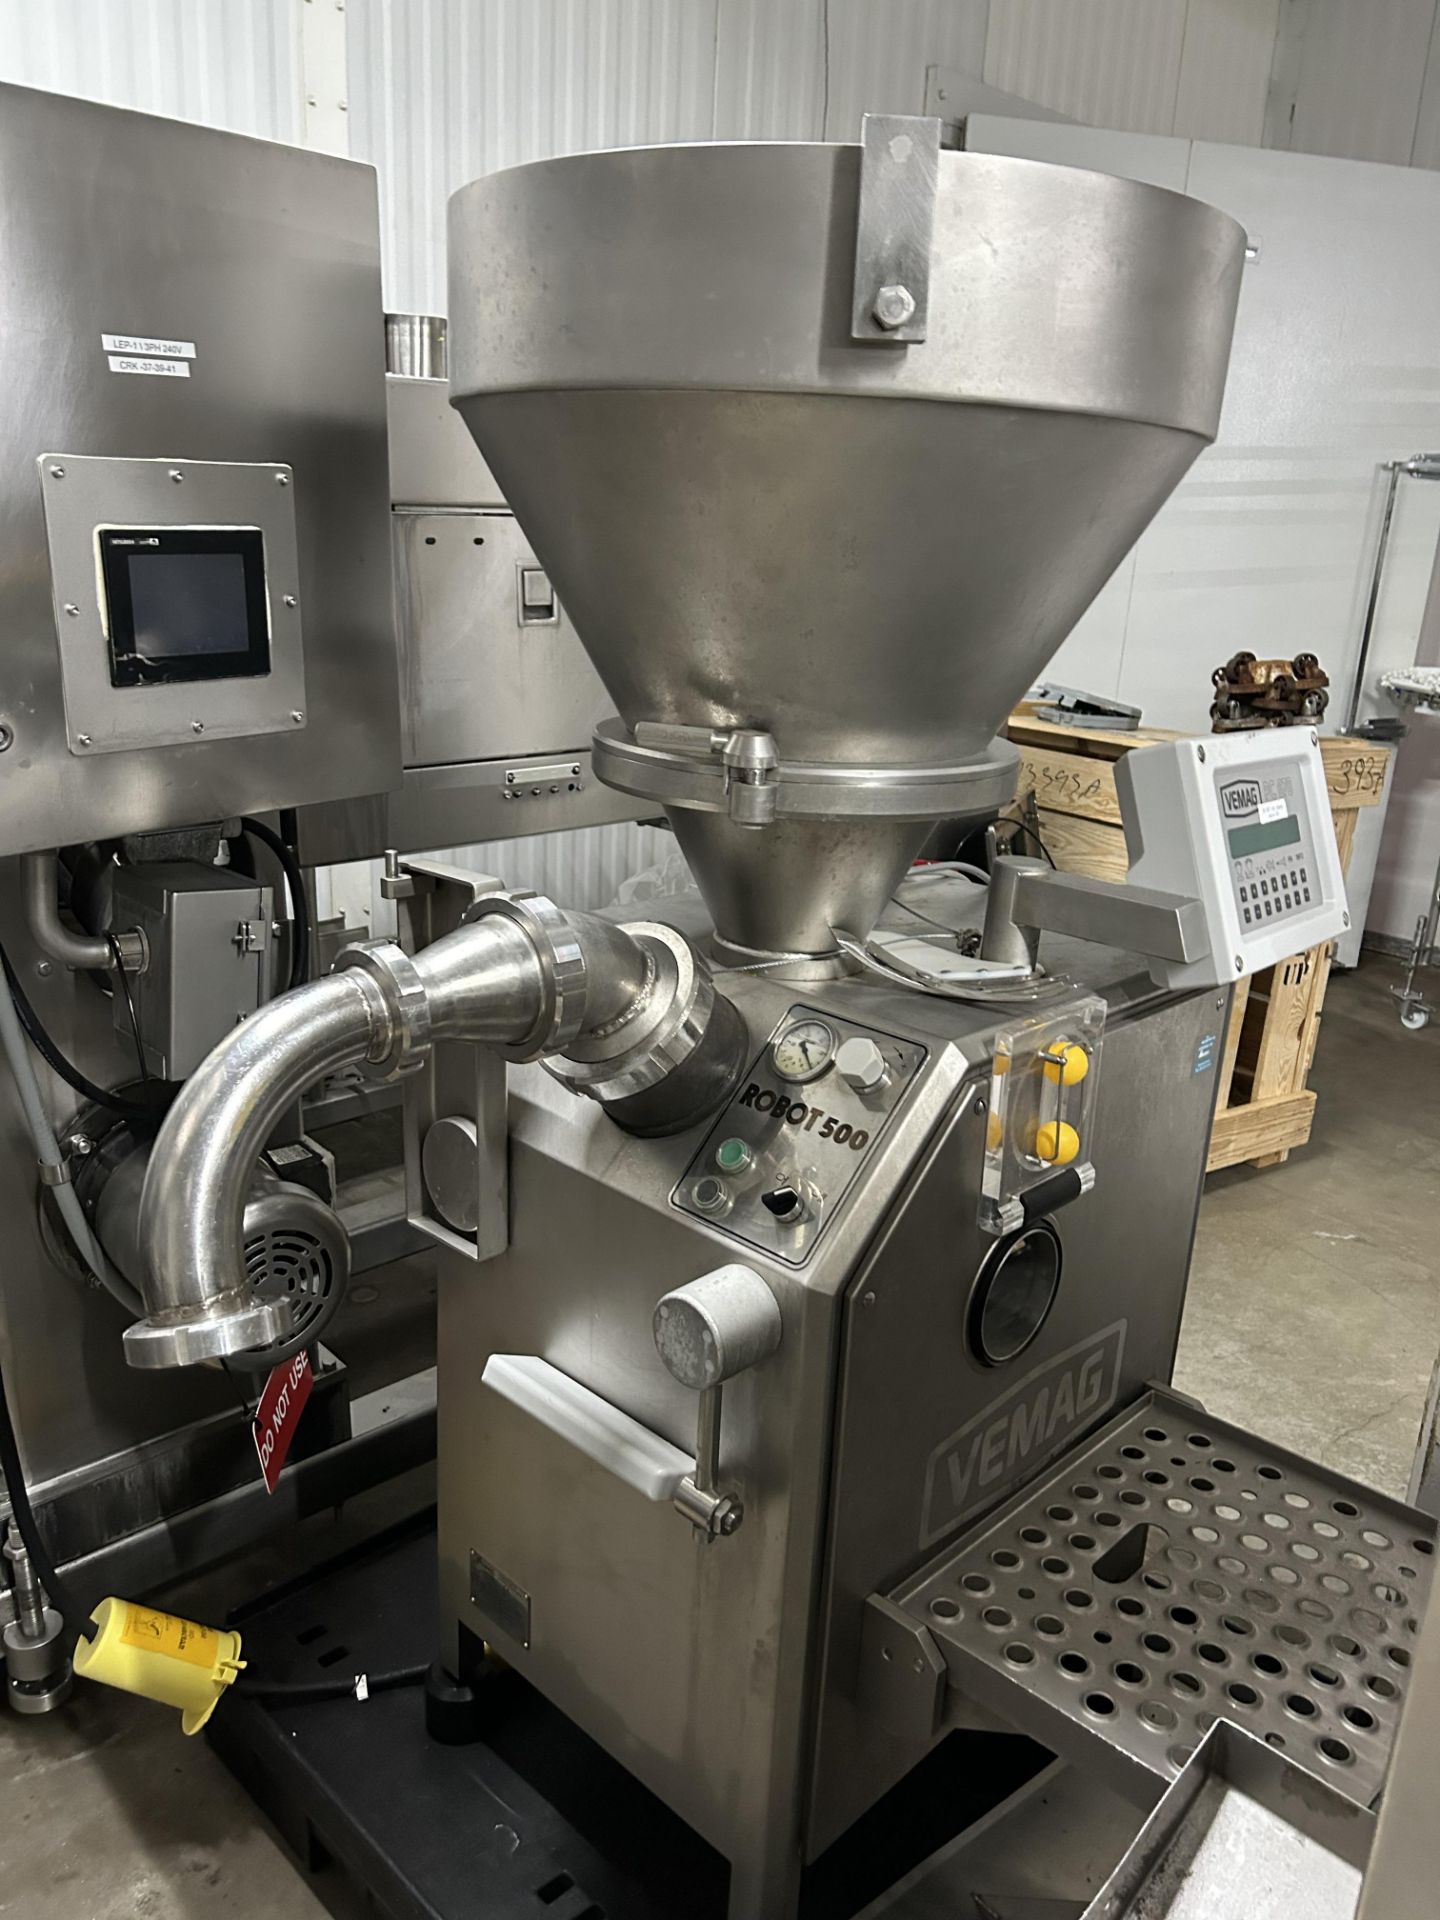 Lot Location: St. Louis MO - Vemag Robot 500 Extruder/Stuffer, DOM 2016, S/N #1285033 - Image 2 of 10